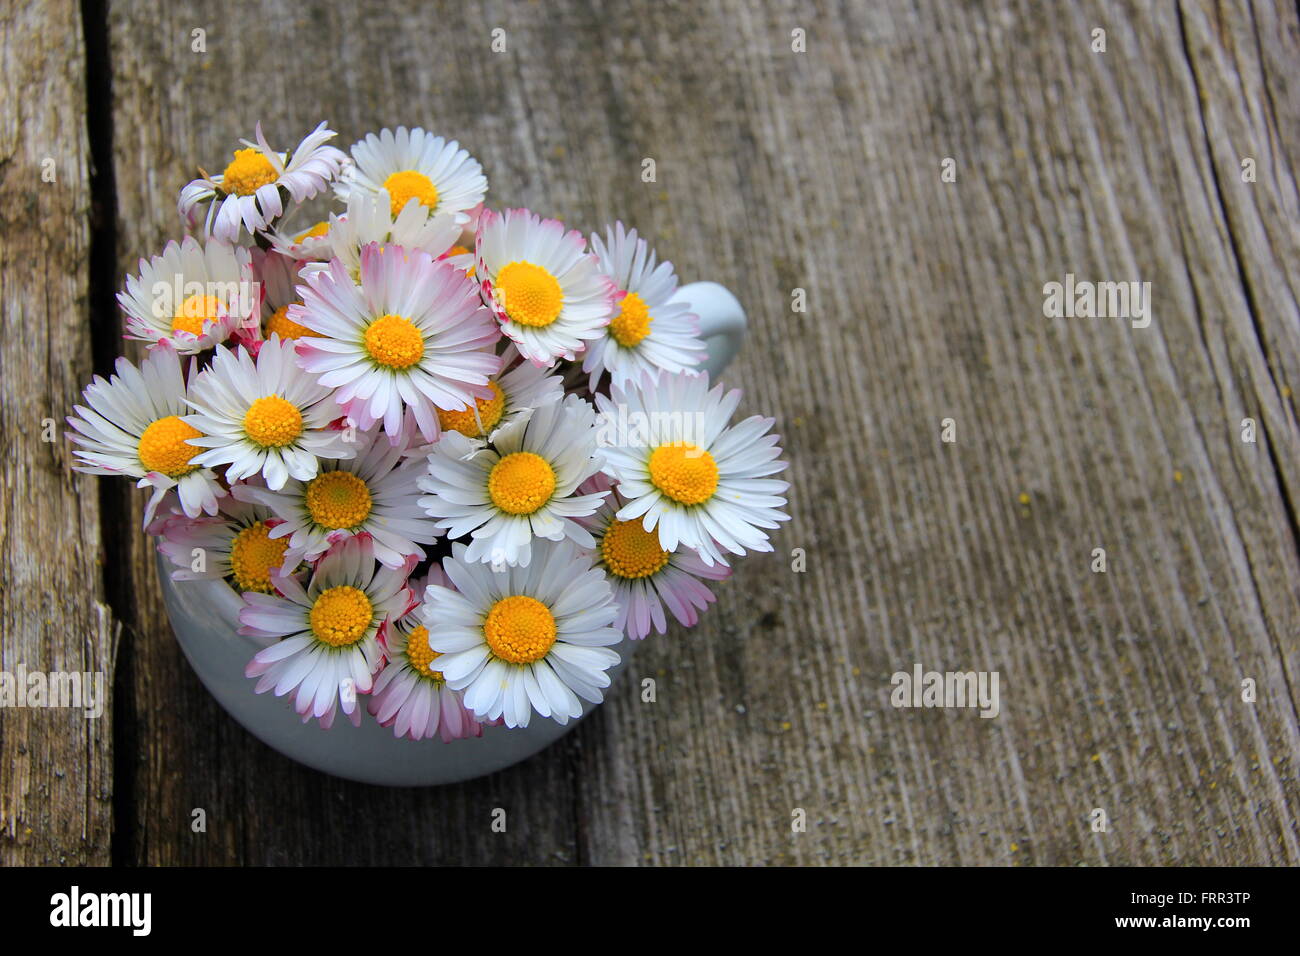 Daisies in a white cup on a wooden background Stock Photo